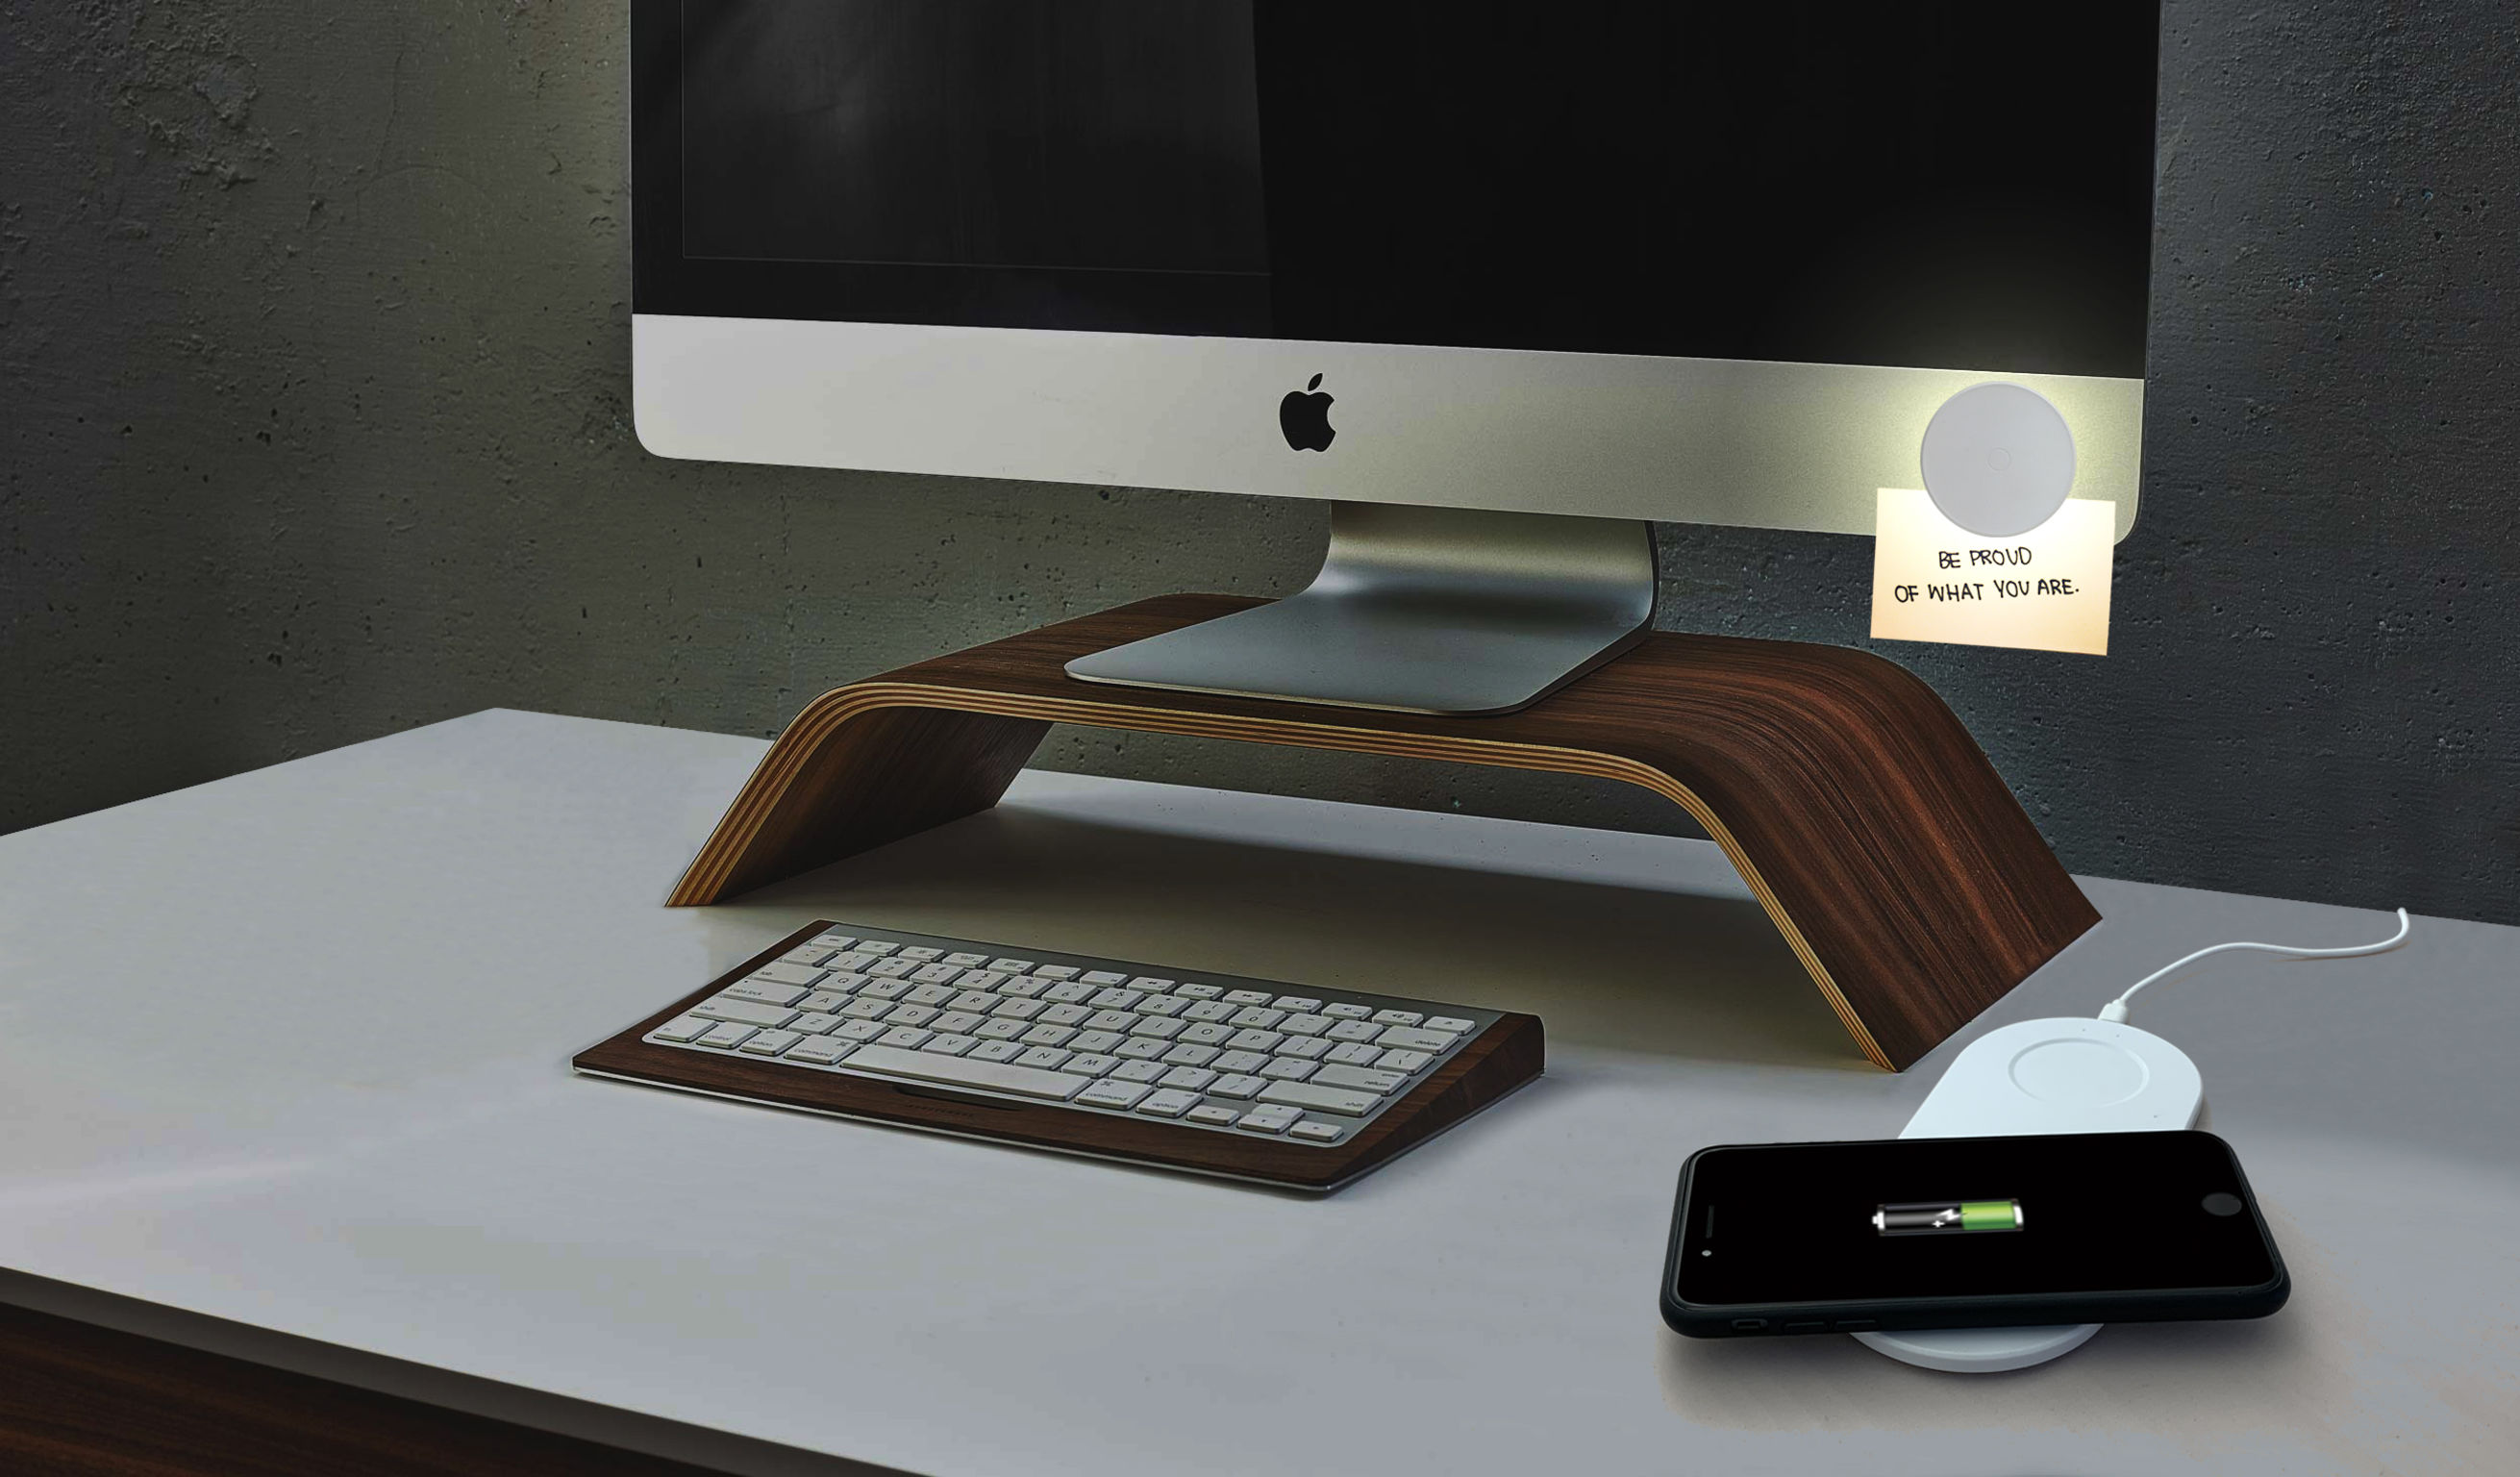 Halo Wireless Charging Pad with Bedside Lamp